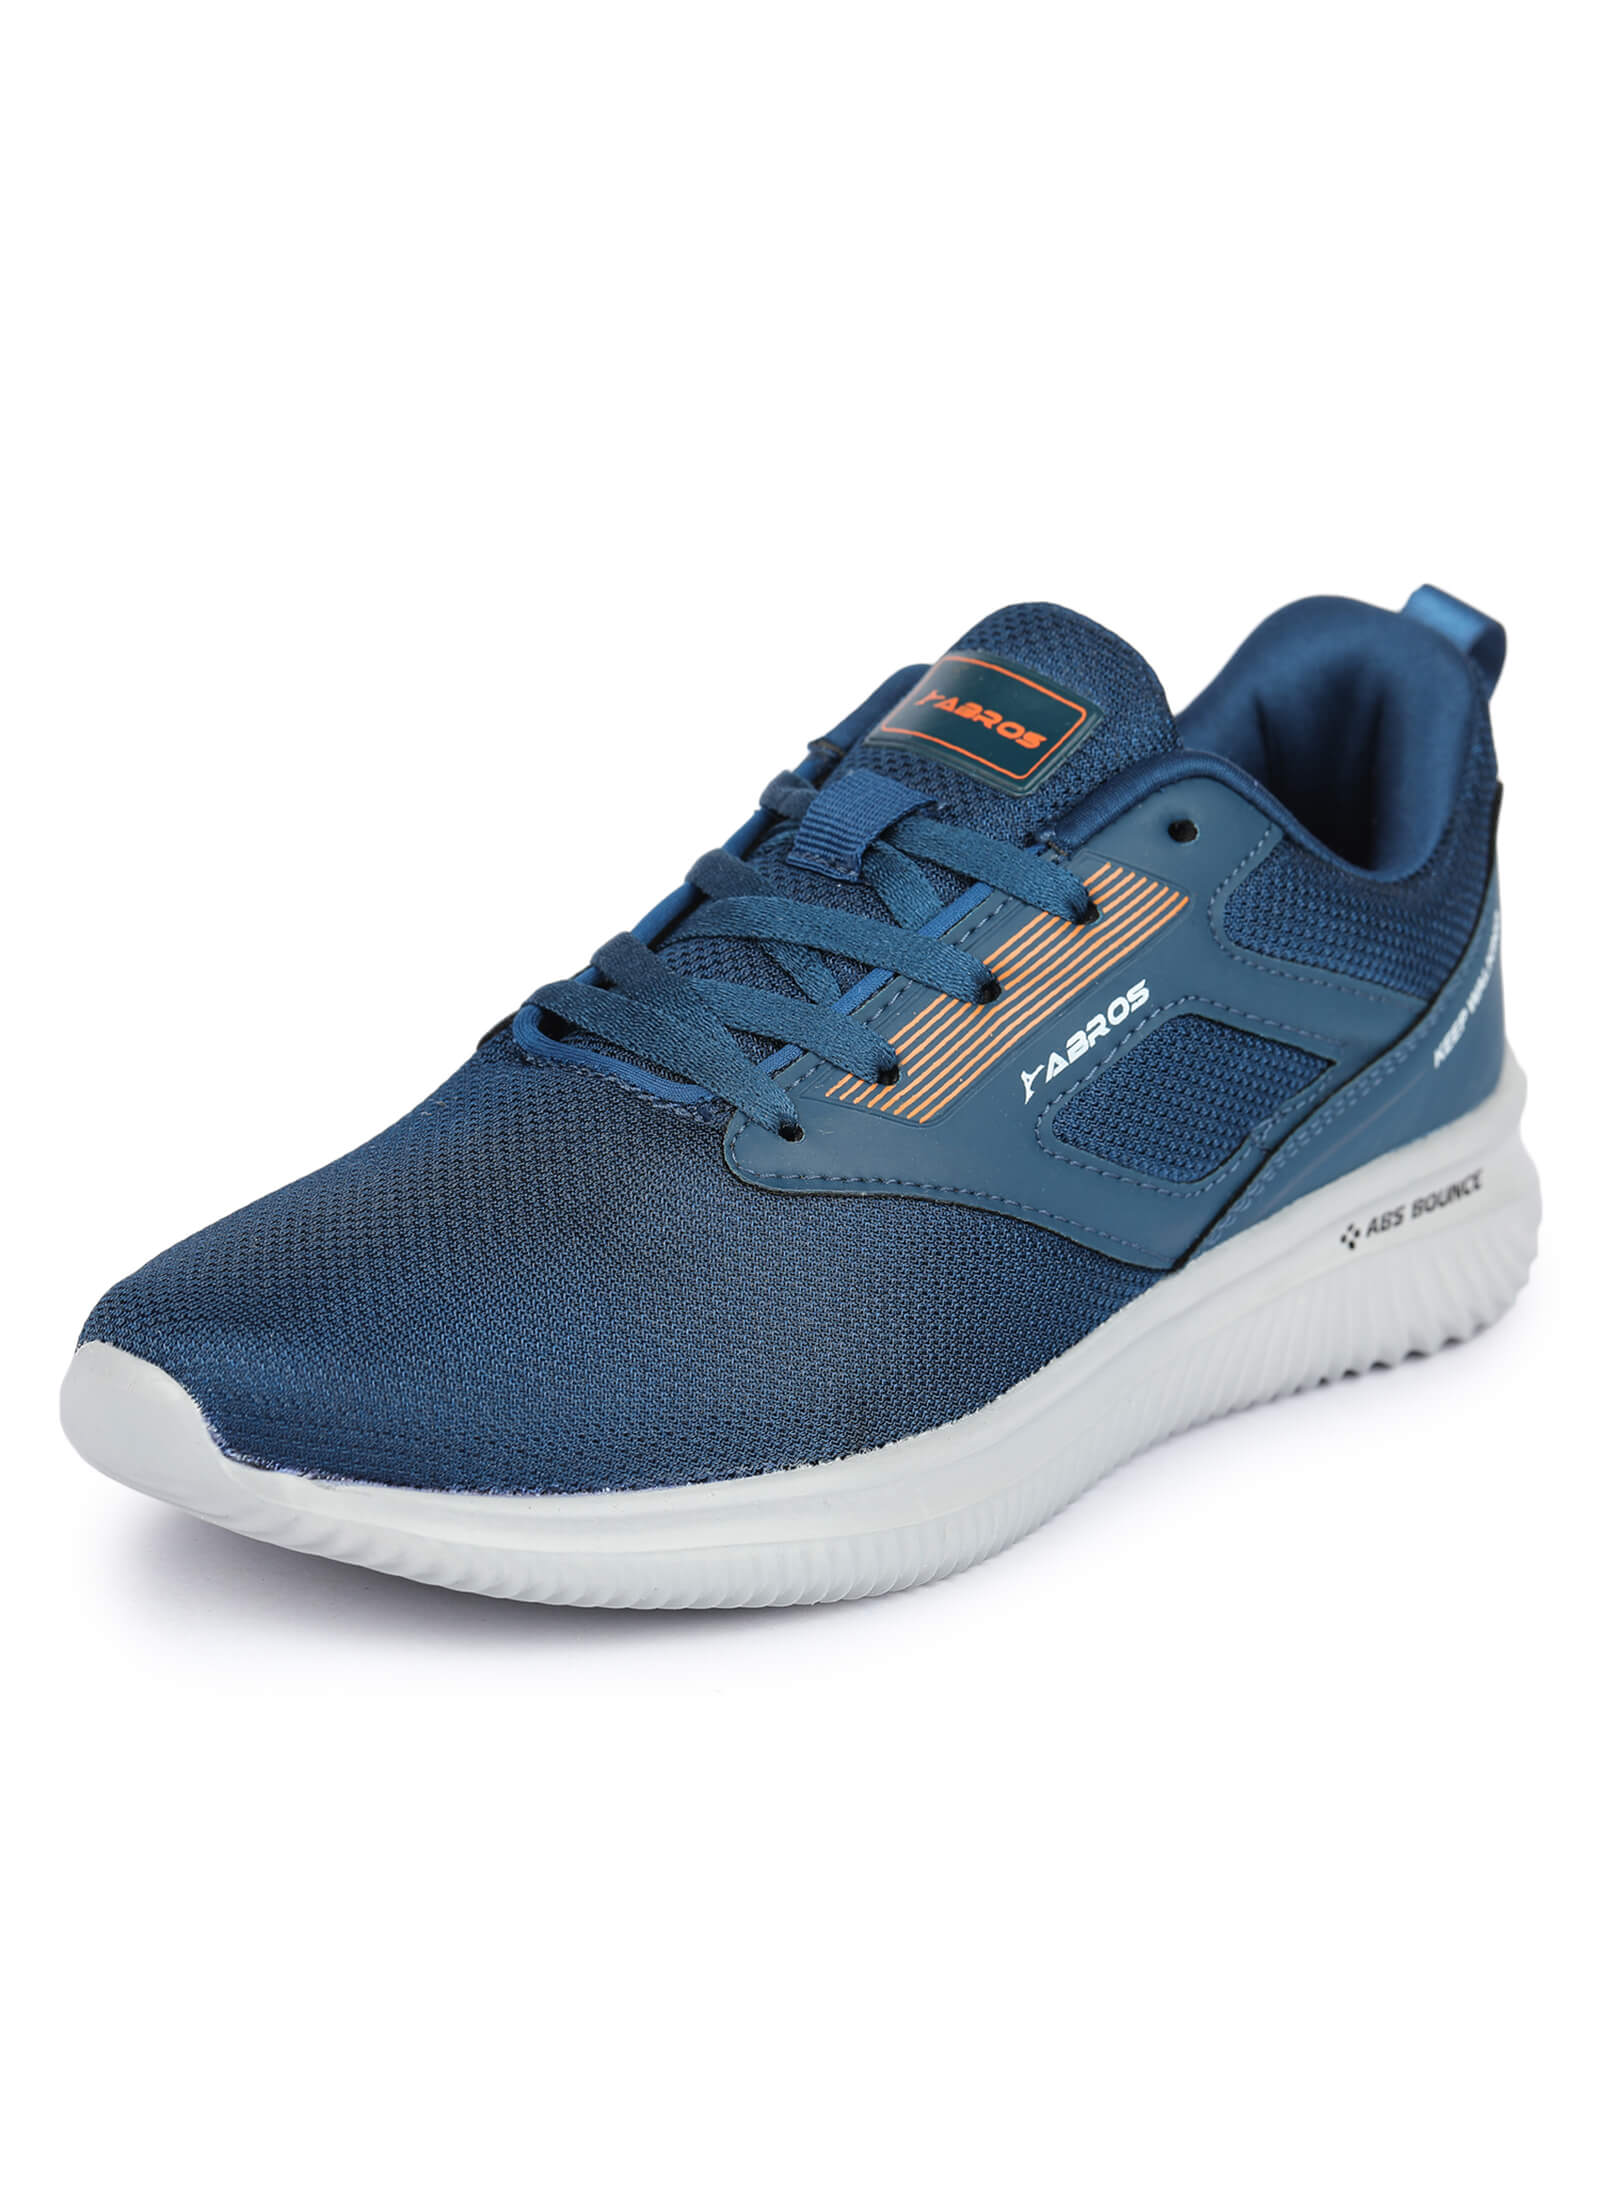 Glide-N Sports Shoes For Men